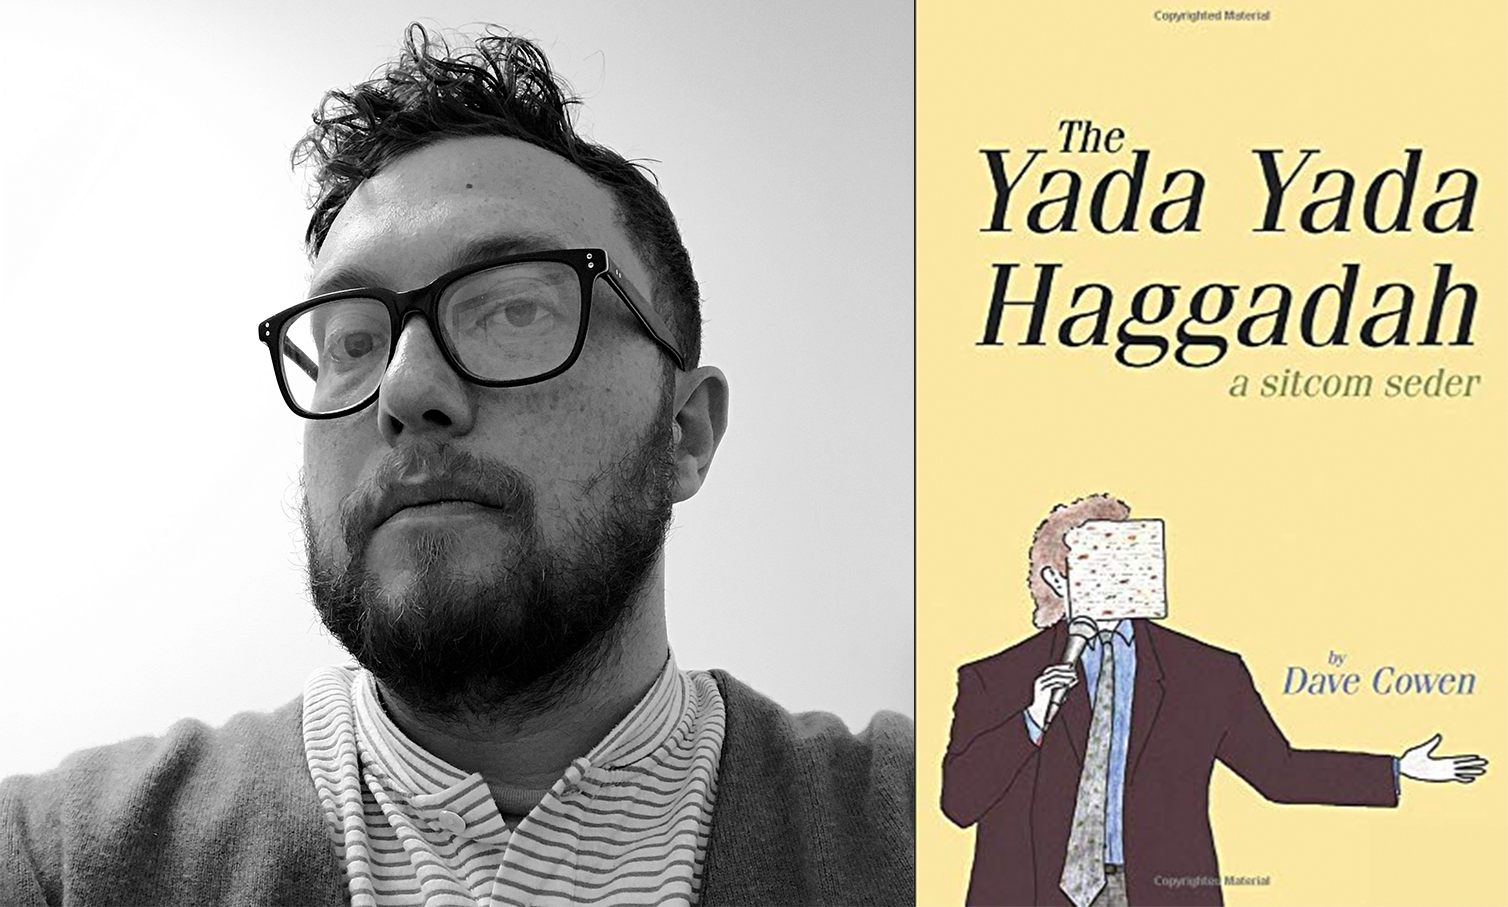 Author of The Trump Passover Haggadah and The Yada Yada Haggadah is Haggadot.com's new Content and Community Manager